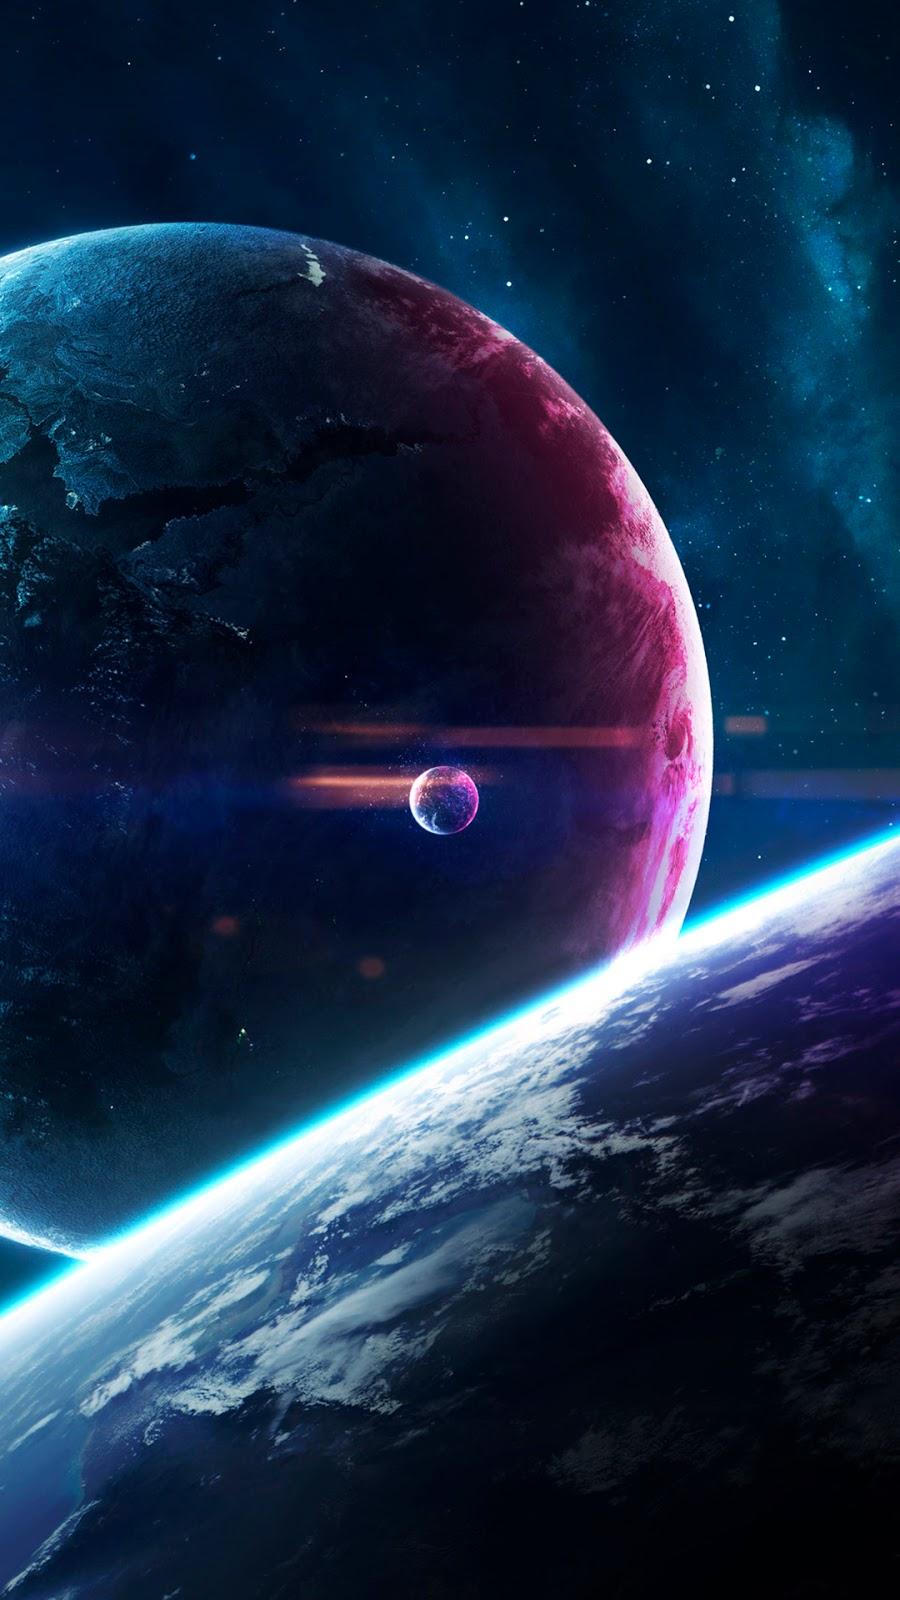 Amazing space phone wallpaper collection